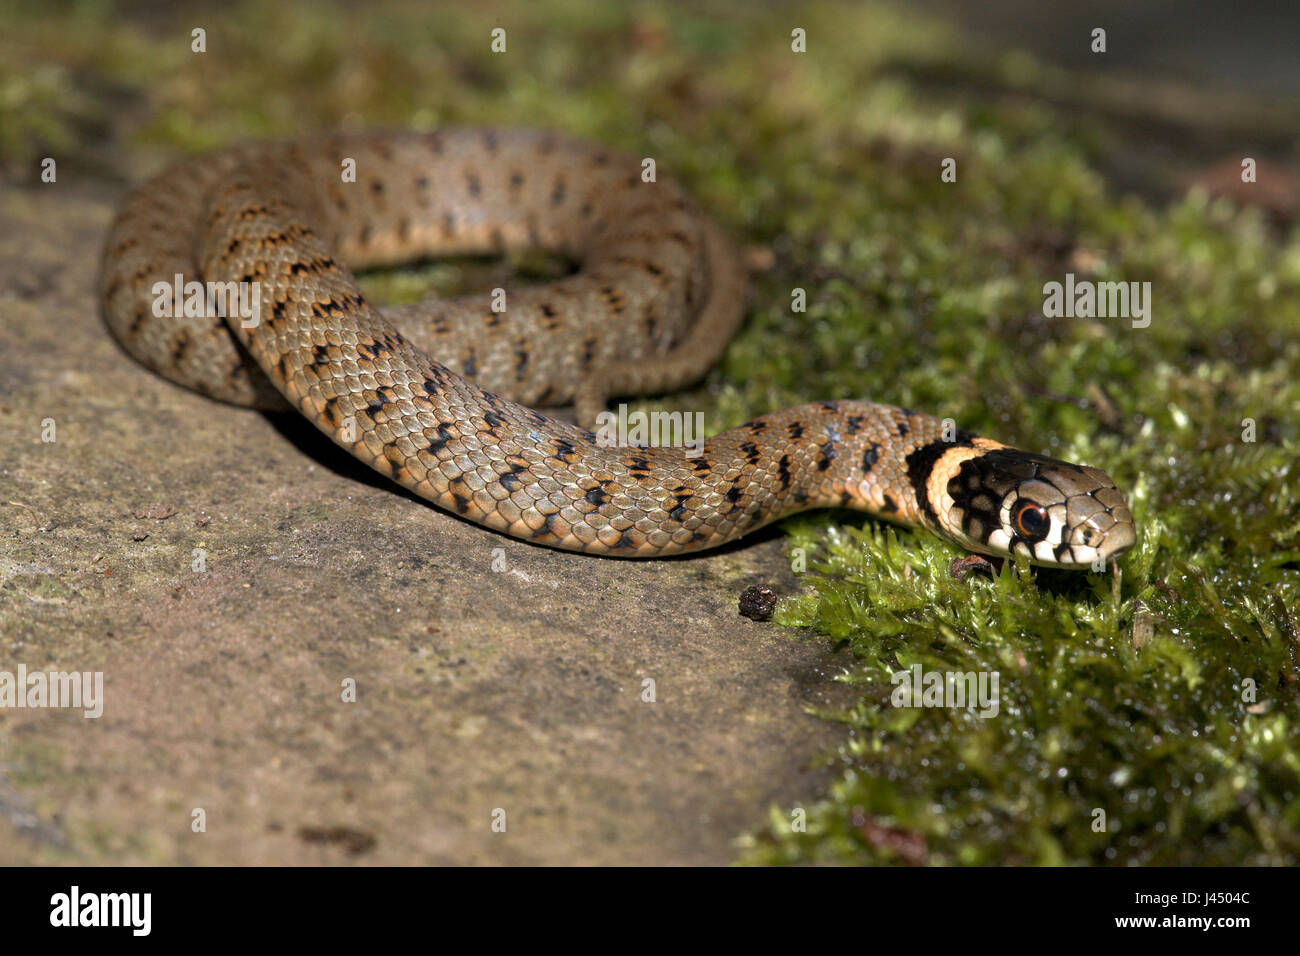 photo of a juvenile grass snake on a stone with green moss Stock Photo